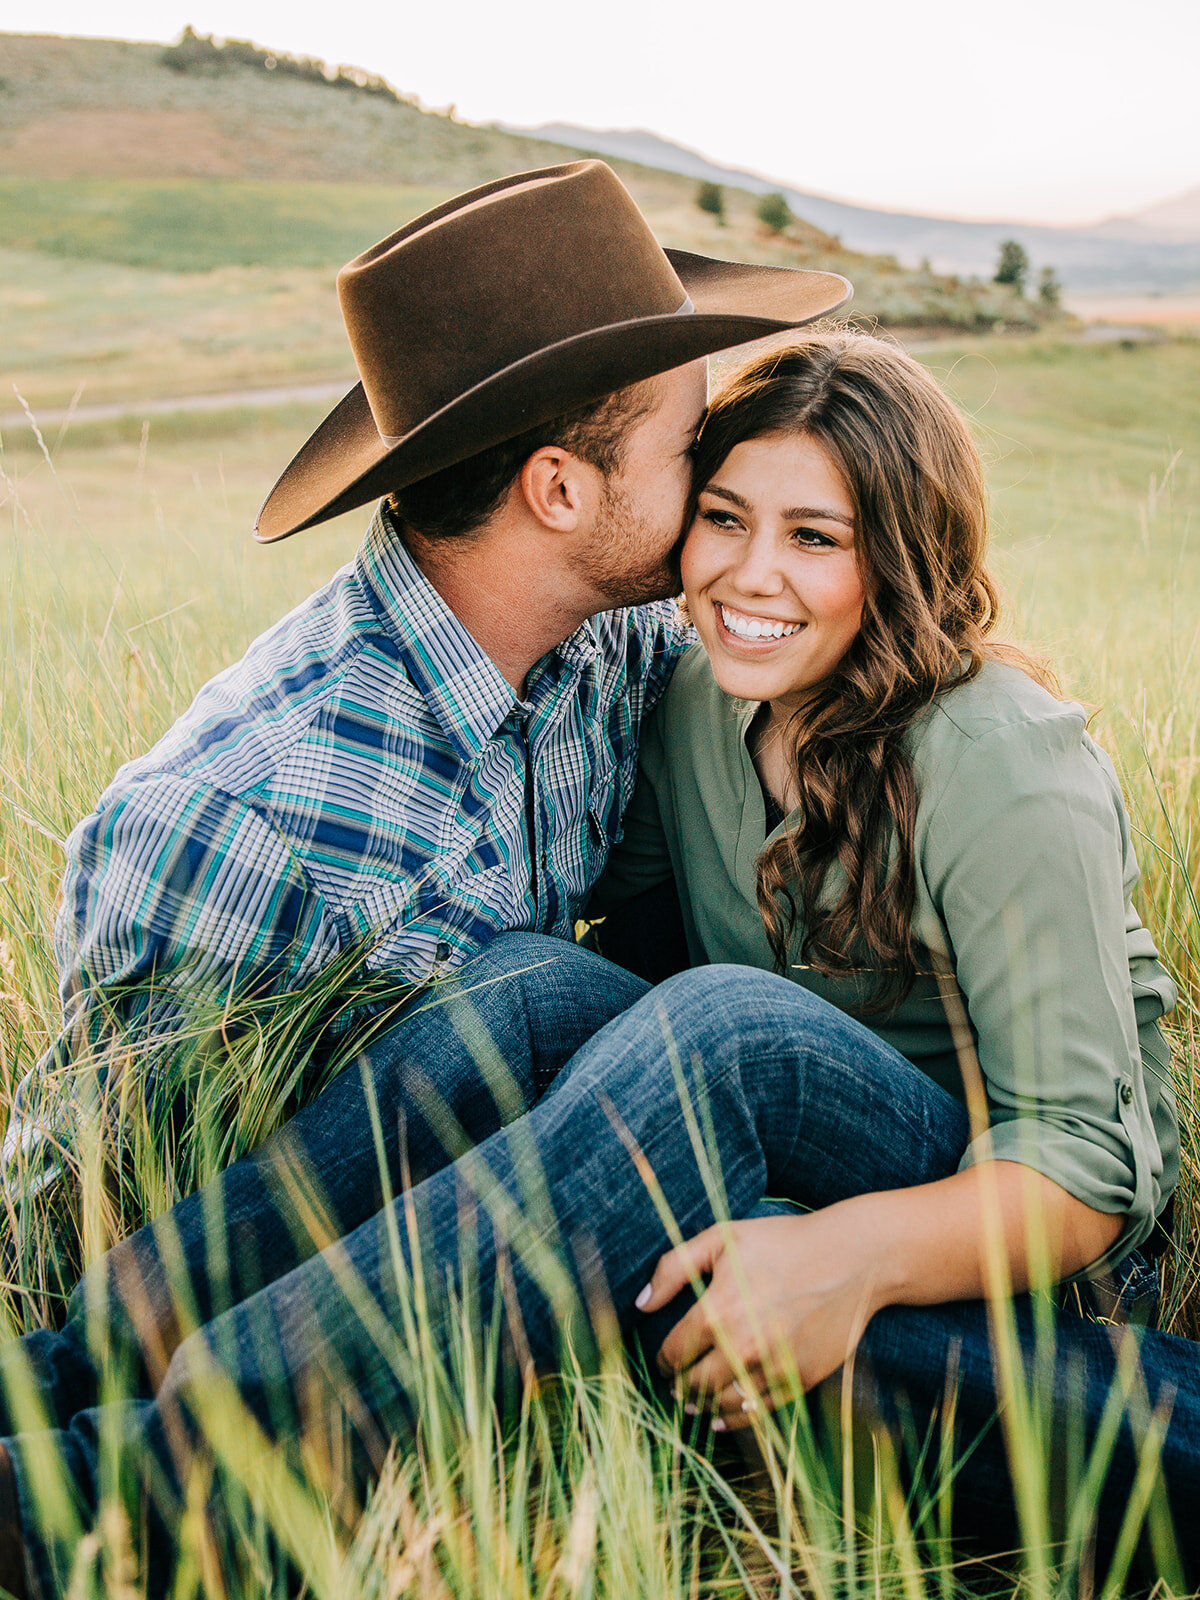  professional cache valley photographer grass hills and wildflowers couple posing ideas Utah engagement session paradise Utah farm boy and girl green field casual outfit ideas women hairstyles telling secrets lover swing dancing partners small town c